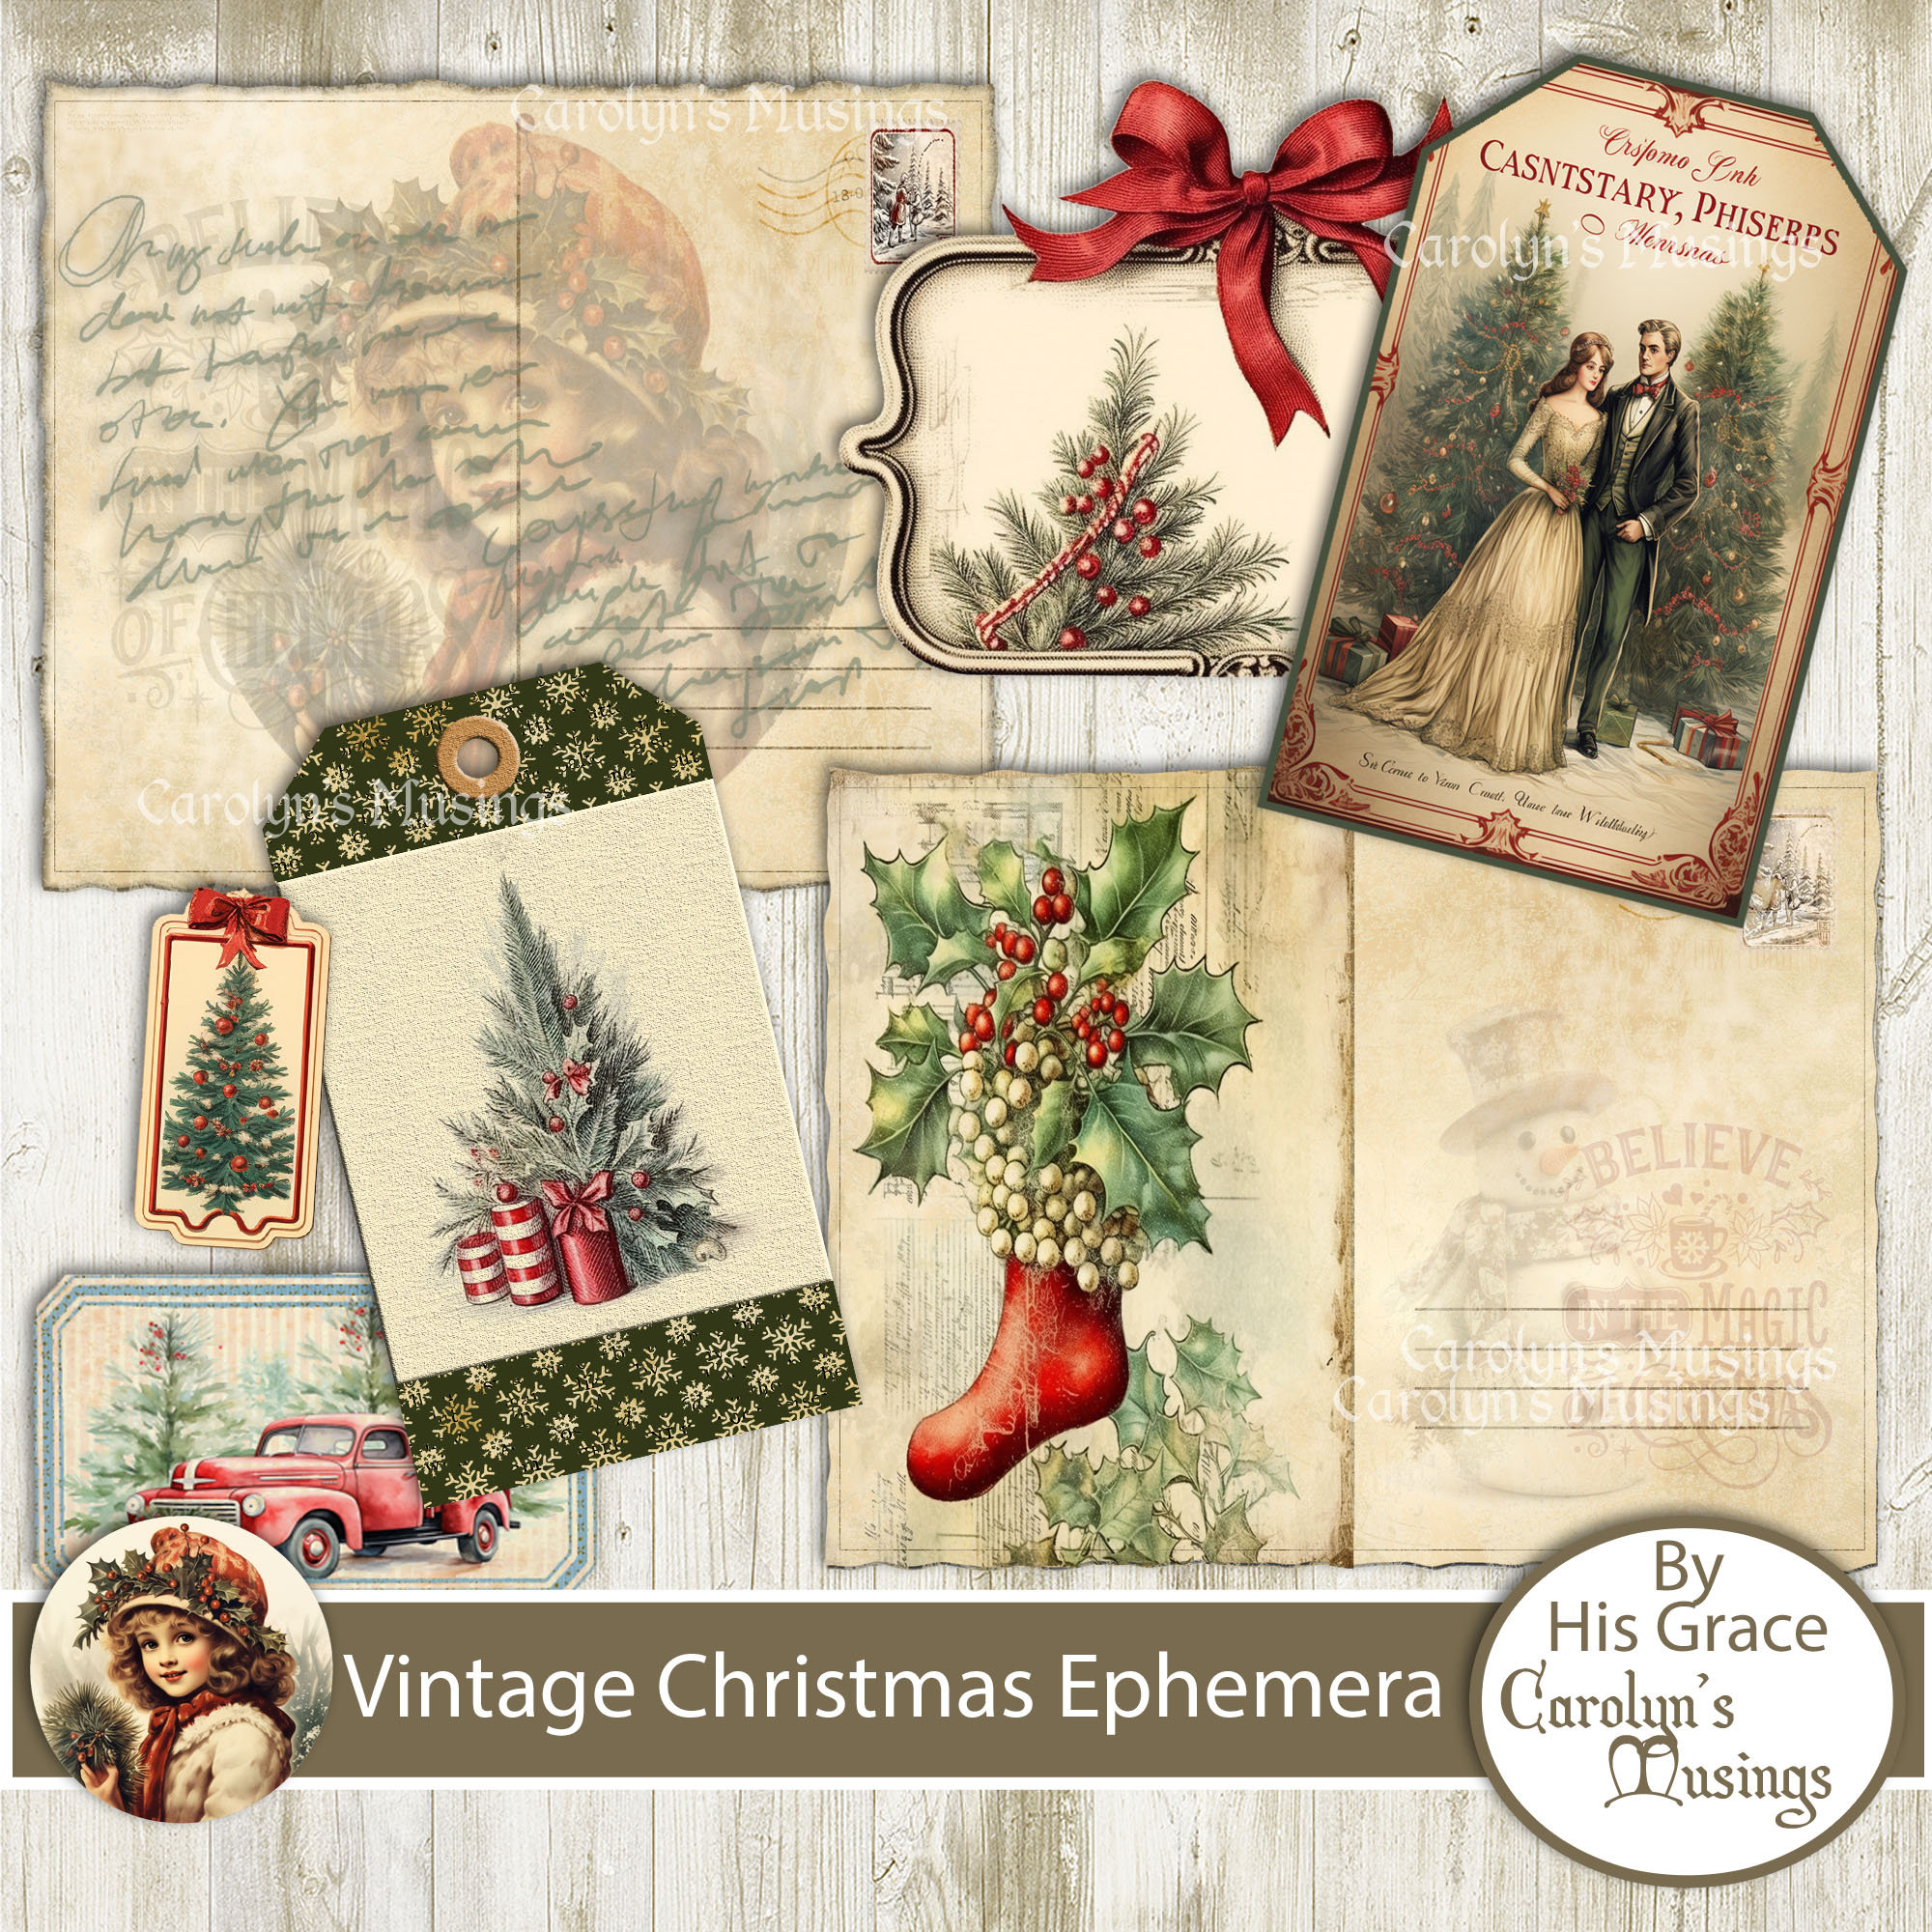 Vintage Christmas Ephemera Book: 500+ Christmas Vintage Ephemera Images,  Tags, Cards Pockets & More For Cut Out, Junk Journals, Collage, Or